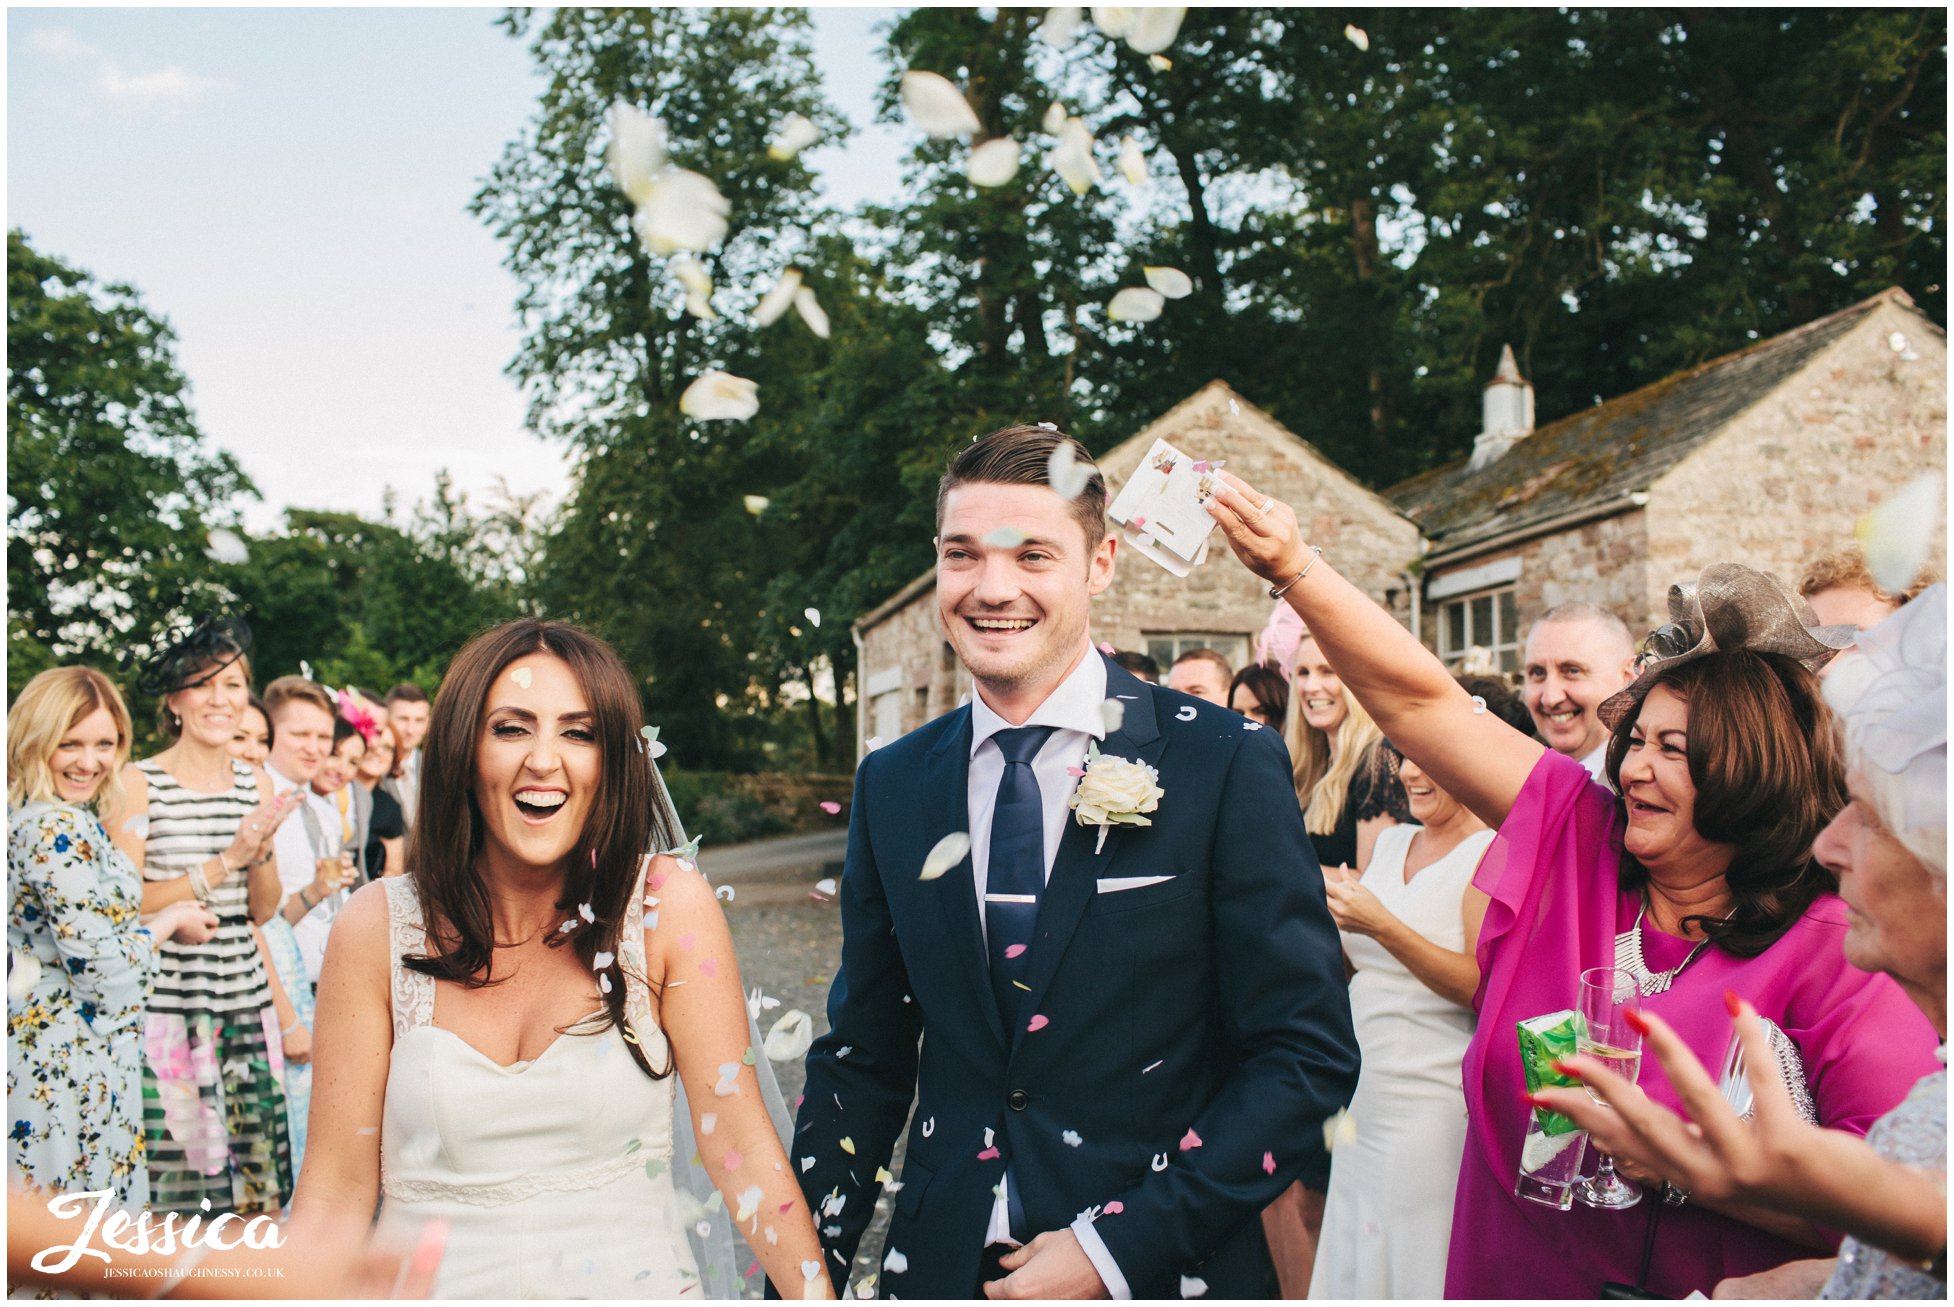 newly wed's walk through confetti line at their lake district wedding